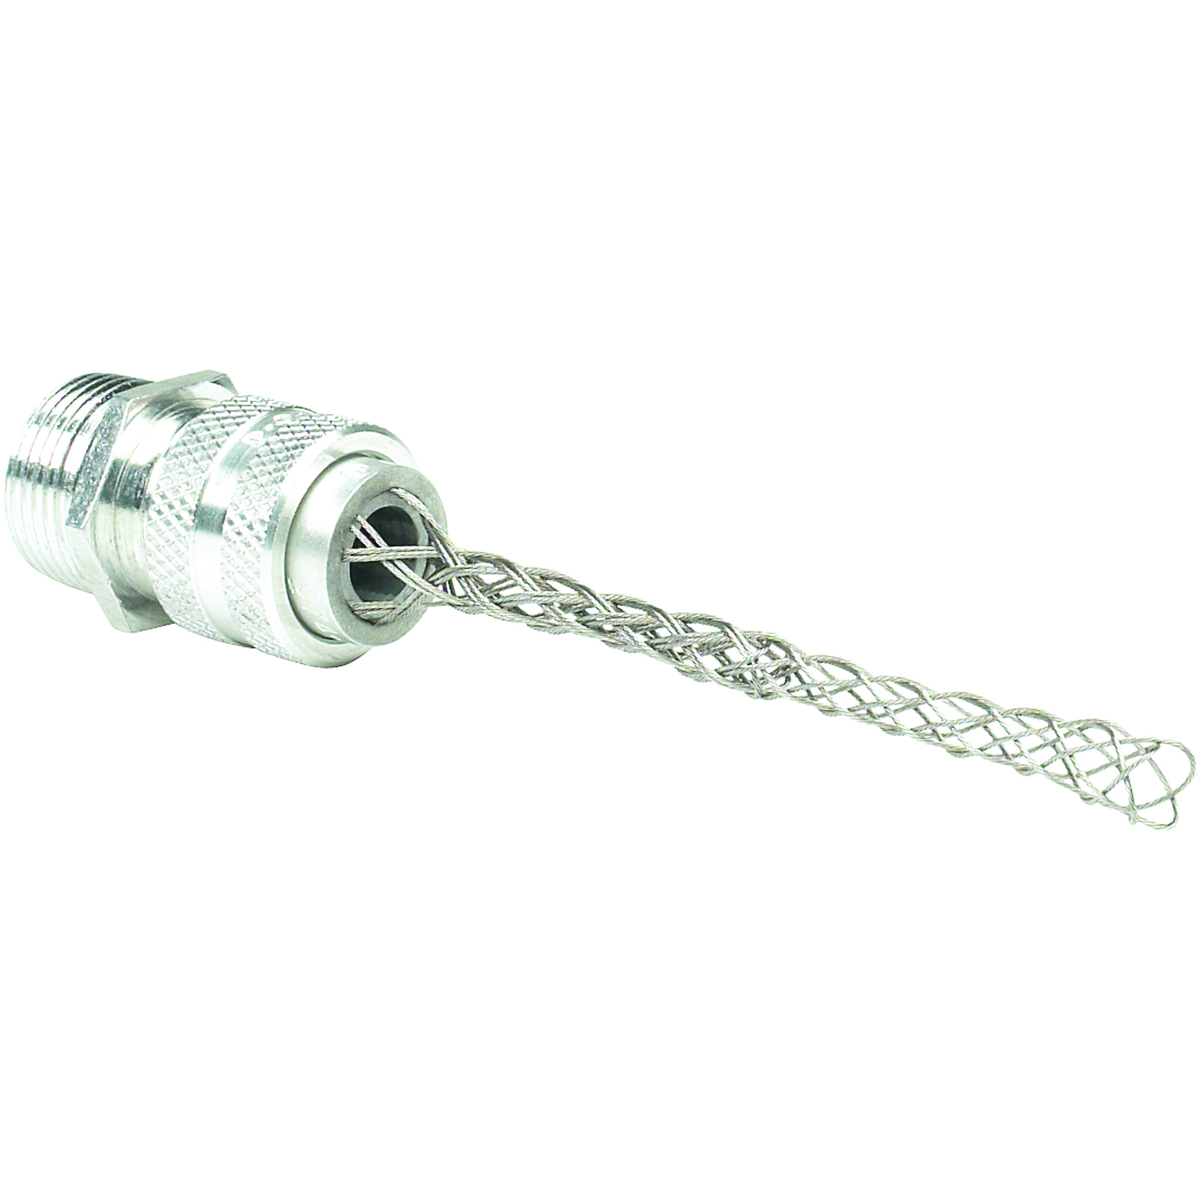 Z SERIES FITTINGS - ALUMINUM CORD CONNECTOR WITH MESH GRIP - Z CORDCONNECTOR - STRAIGHT - NPT SIZE 3/8 IN - WHITE